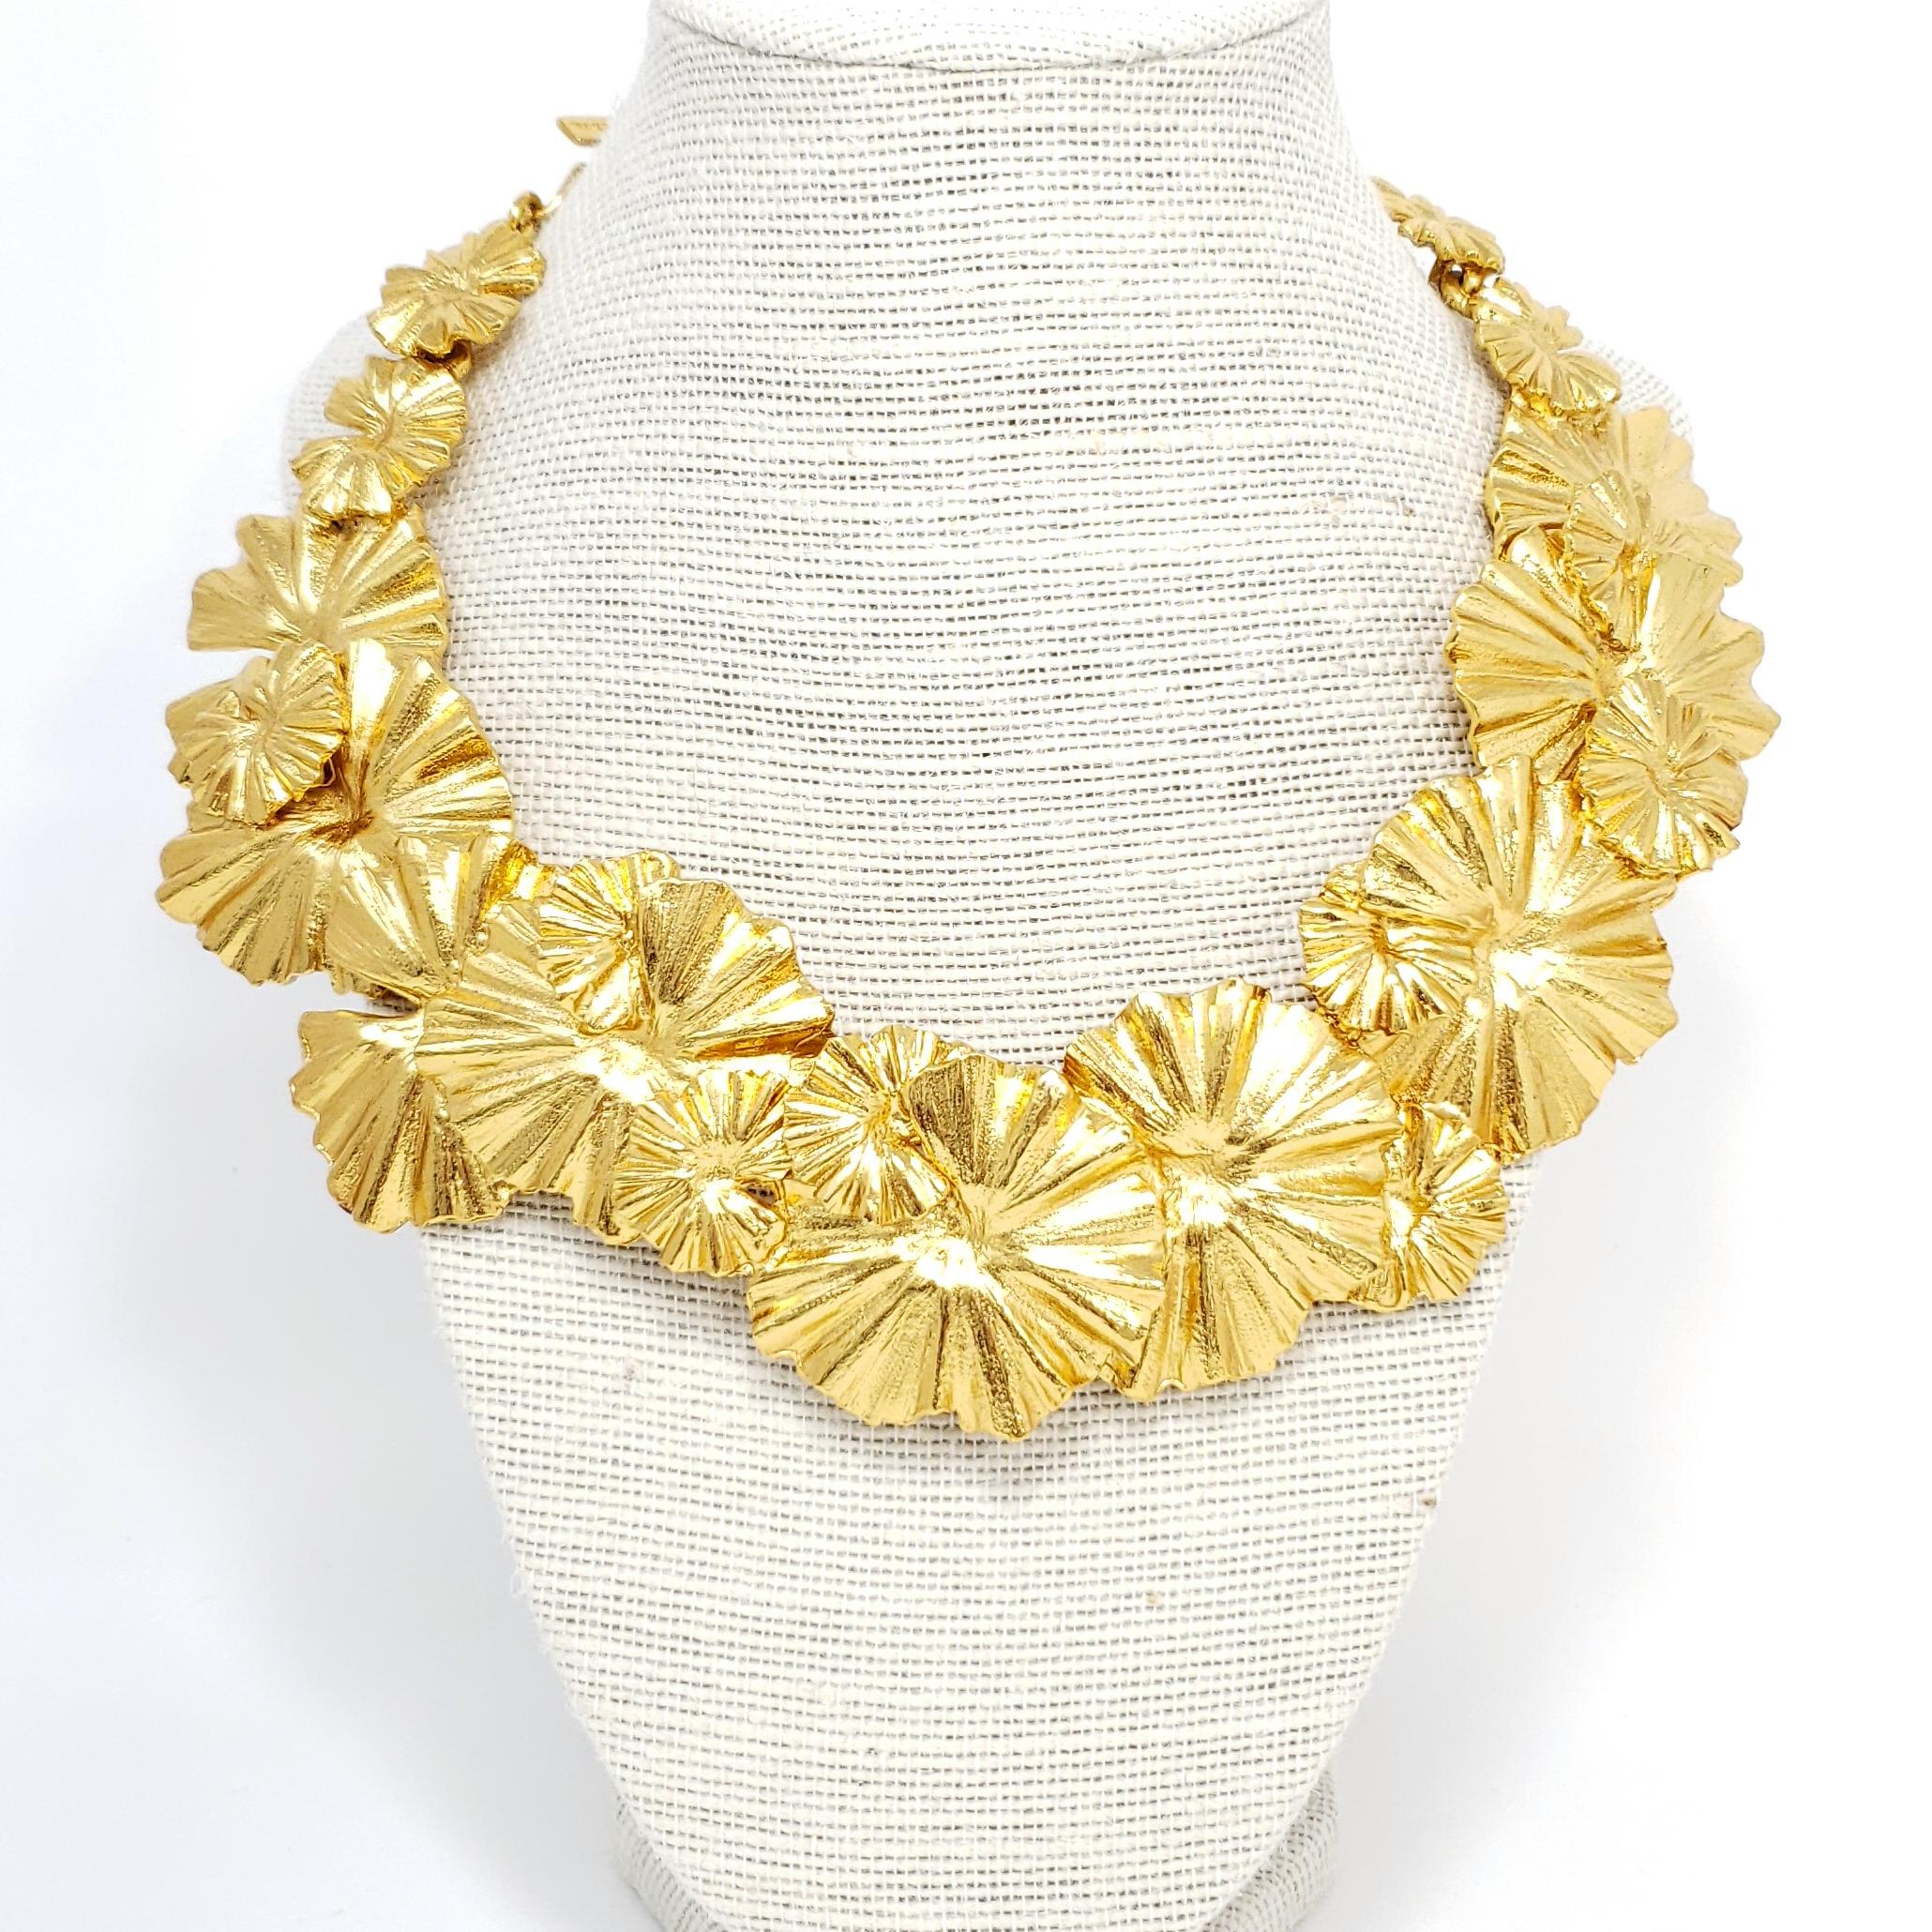 A bold statement necklace from Oscar de la Renta, featuring a strand of clustered golden leaves which rest on the collar.

Hallmarks: Oscar de la Renta, Made in USA

Length: 13 to 16.5 inches
